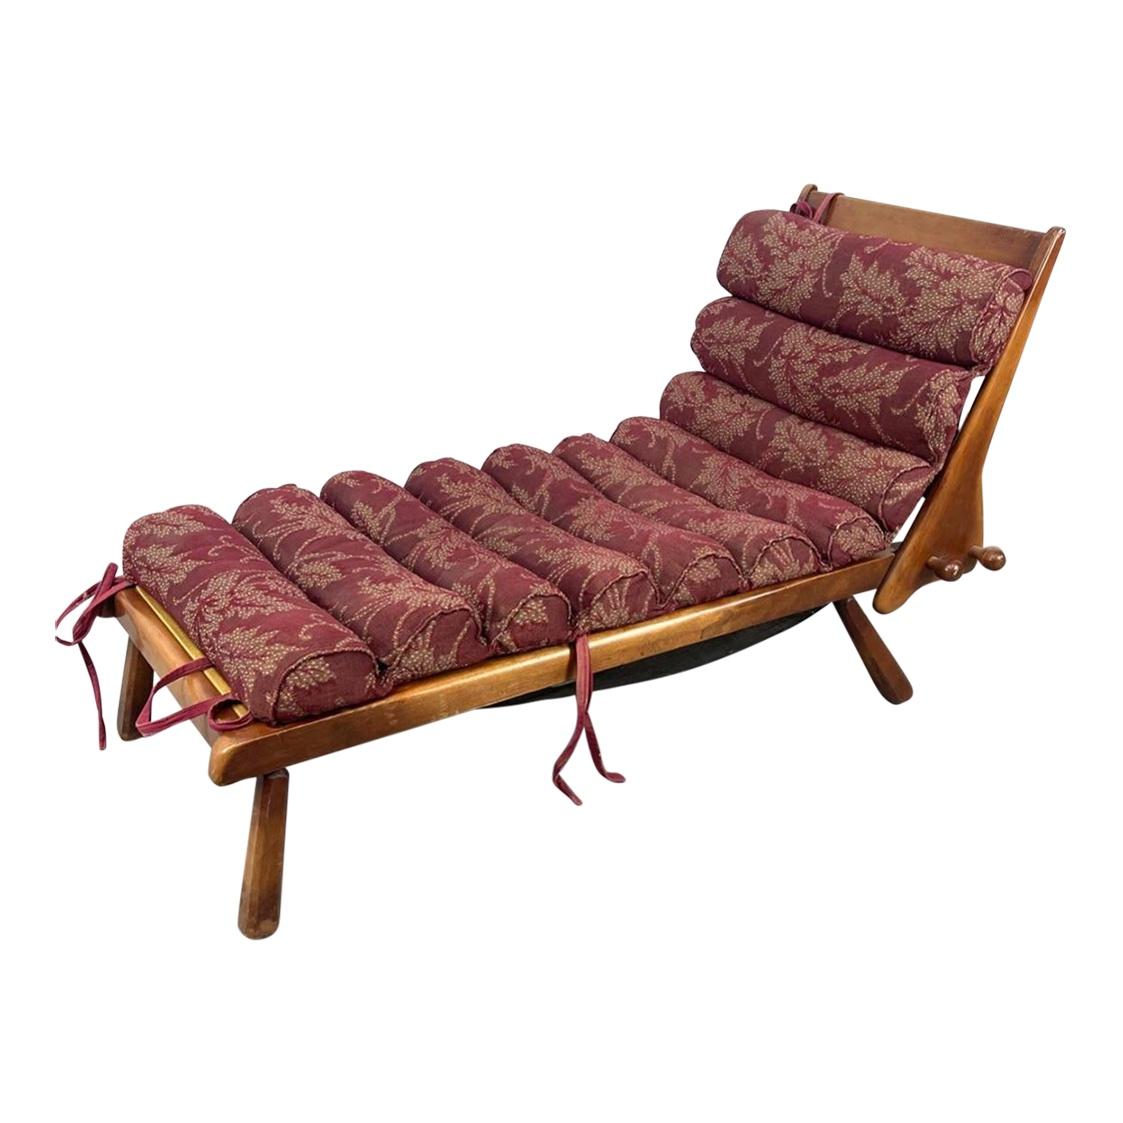 1960s Cushman Furniture Rock Maple Chaise Lounge Chair For Sale